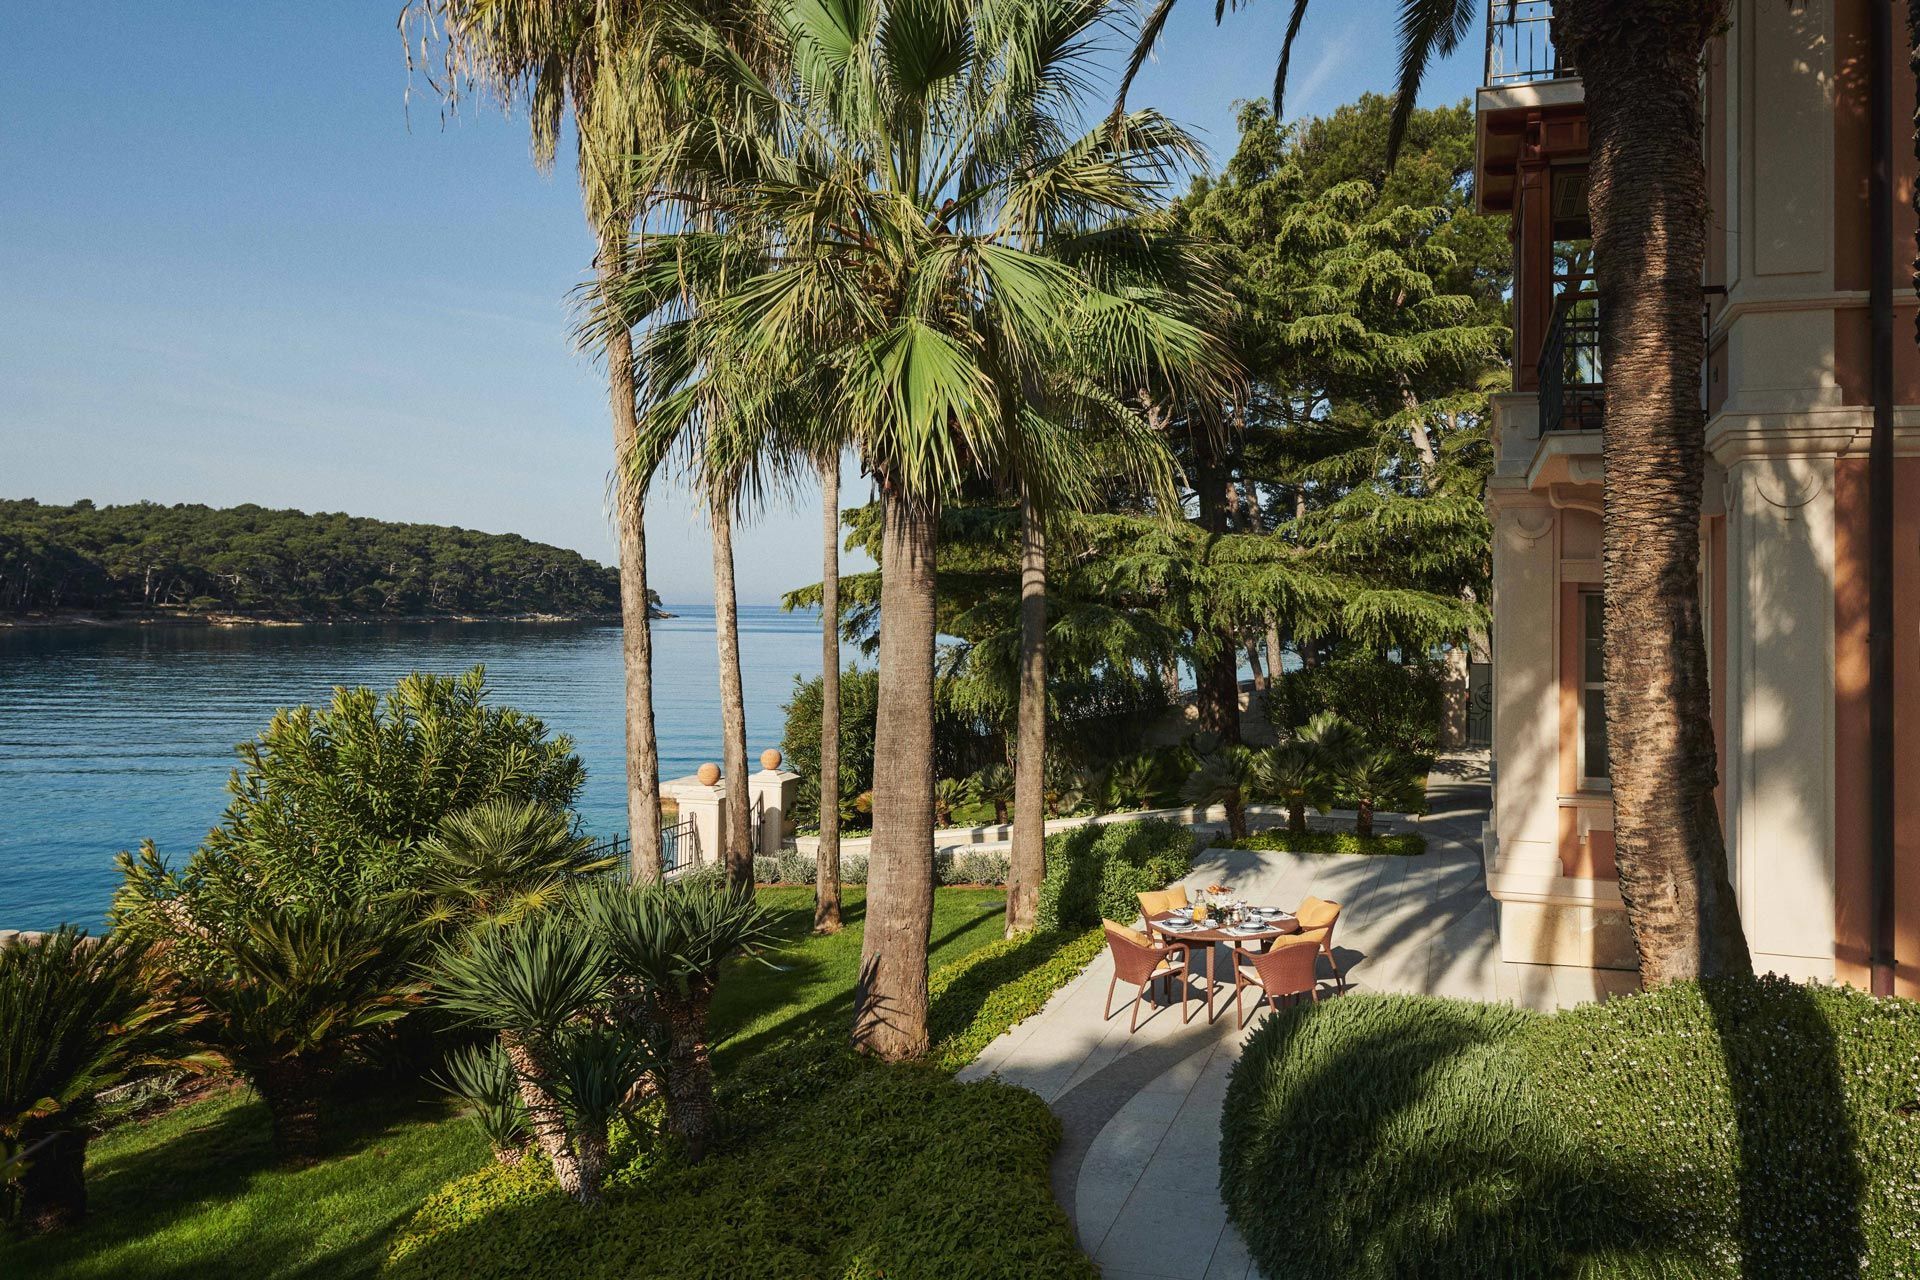 Seaside garden with tall palm trees and a table set for a meal, next to an elegant villa with a view of the bay